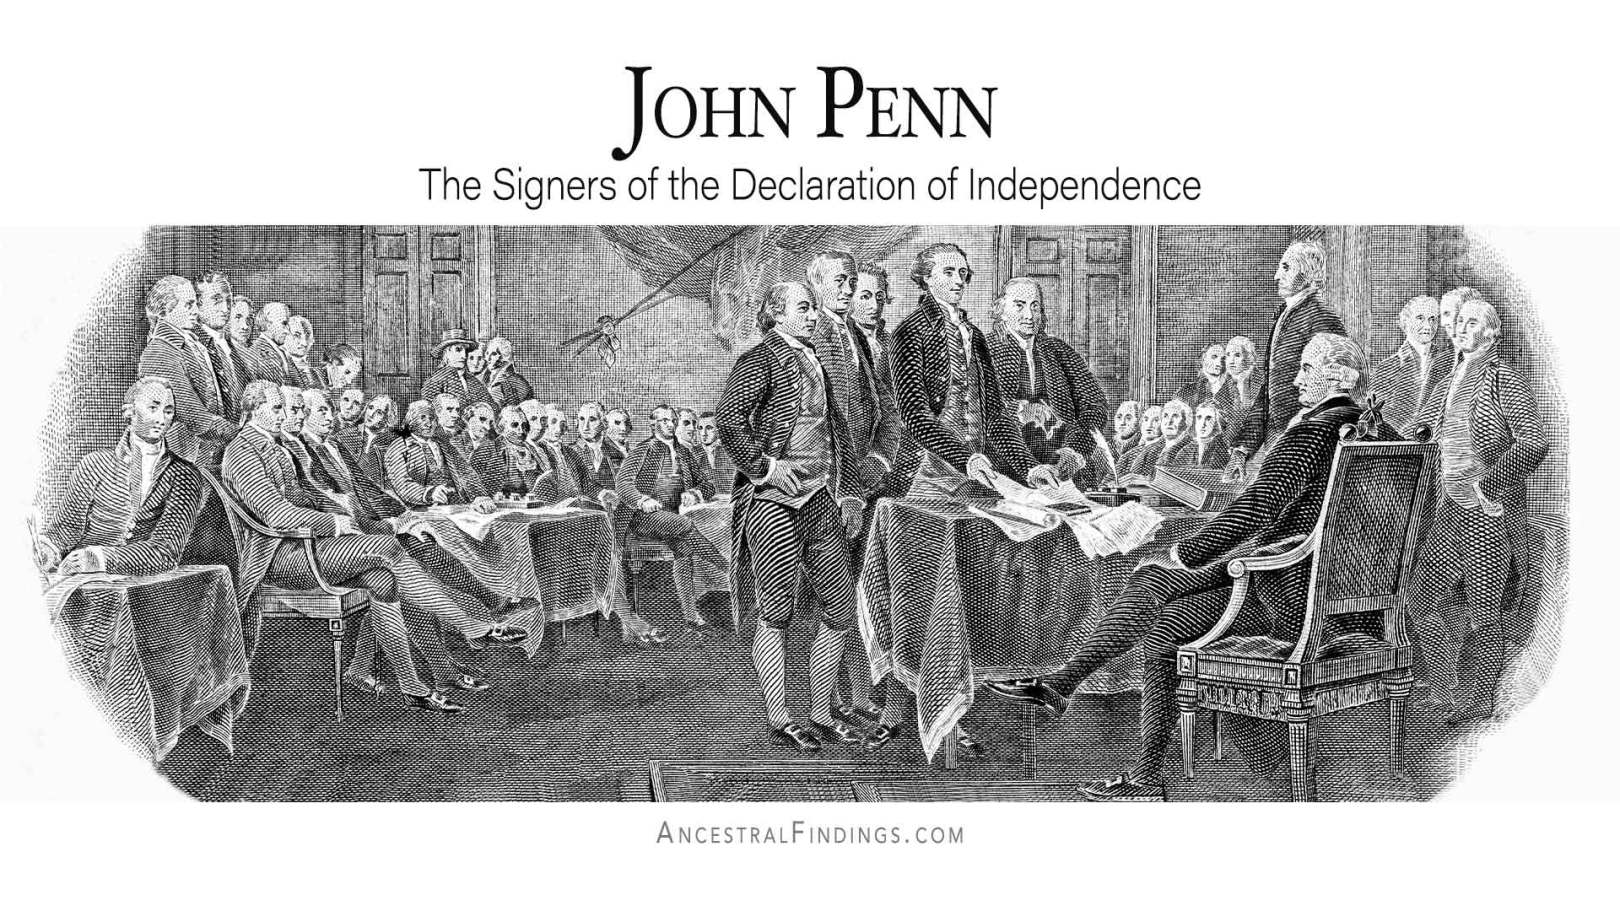 John Penn: The Signers of the Declaration of Independence